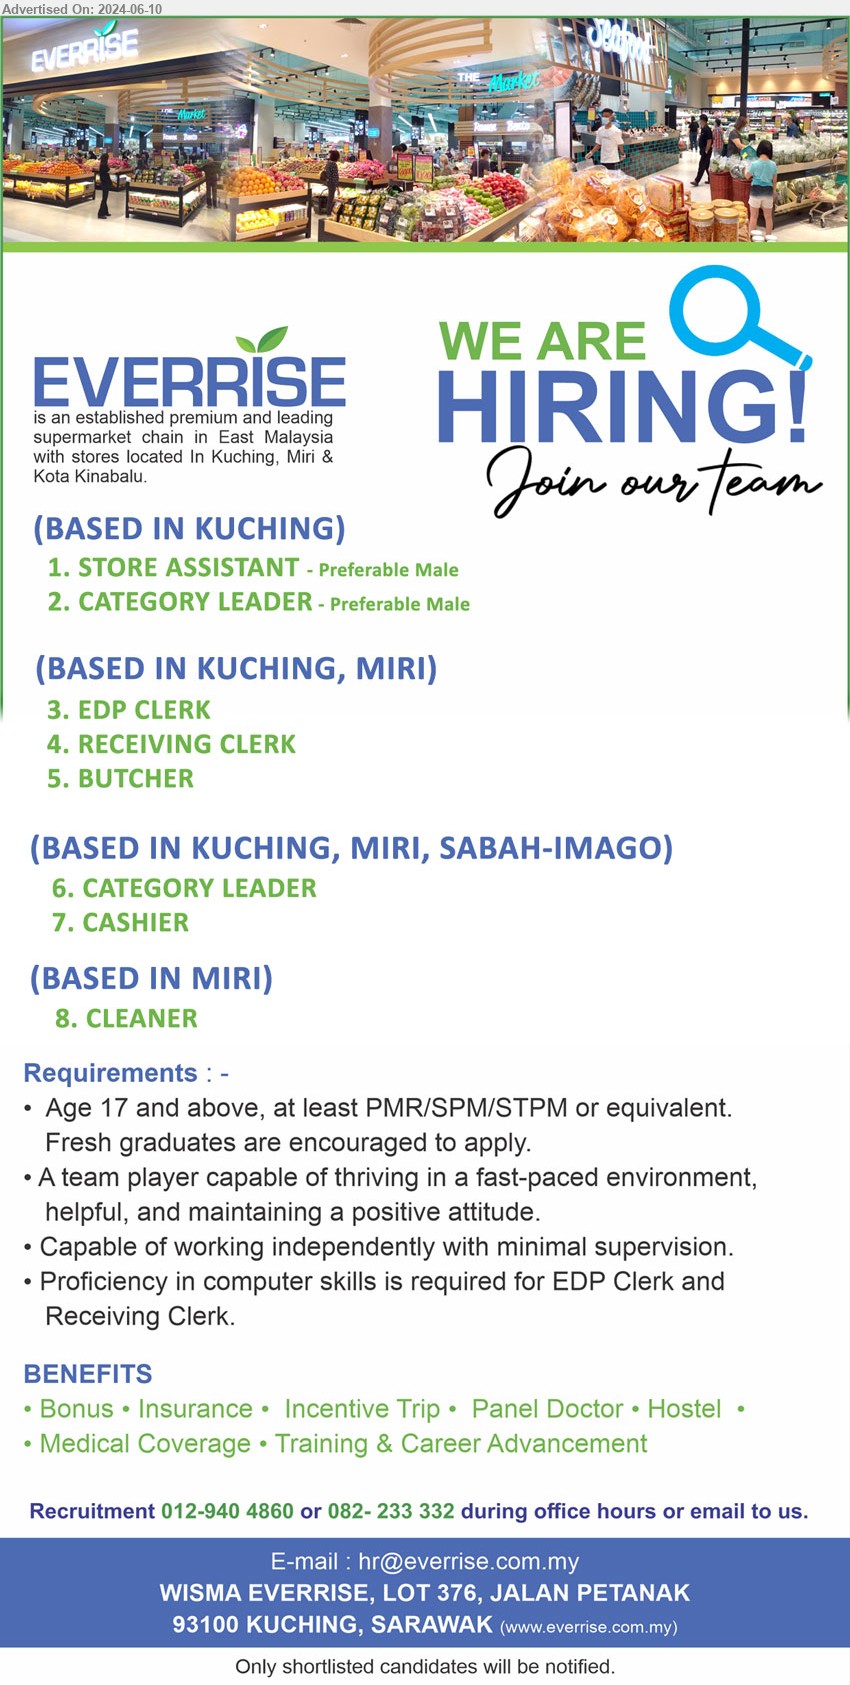 EVERRISE DEPARTMENTAL STORE SDN BHD - 1. STORE ASSISTANT  (Kuching).
2. CATEGORY LEADER (Kuching).
3. EDP CLERK (Kuching, Miri).
4. RECEIVING CLERK (Kuching, Miri).
5. BUTCHER (Kuching, Miri).
6. CATEGORY LEADER  (Kuching, Miri, Sabah-Imago).
7. CASHIER (Kuching, Miri, Sabah-Imago).
8. CLEANER (Miri).
Call 012-9404860, 082-233332 / Email resume to ...